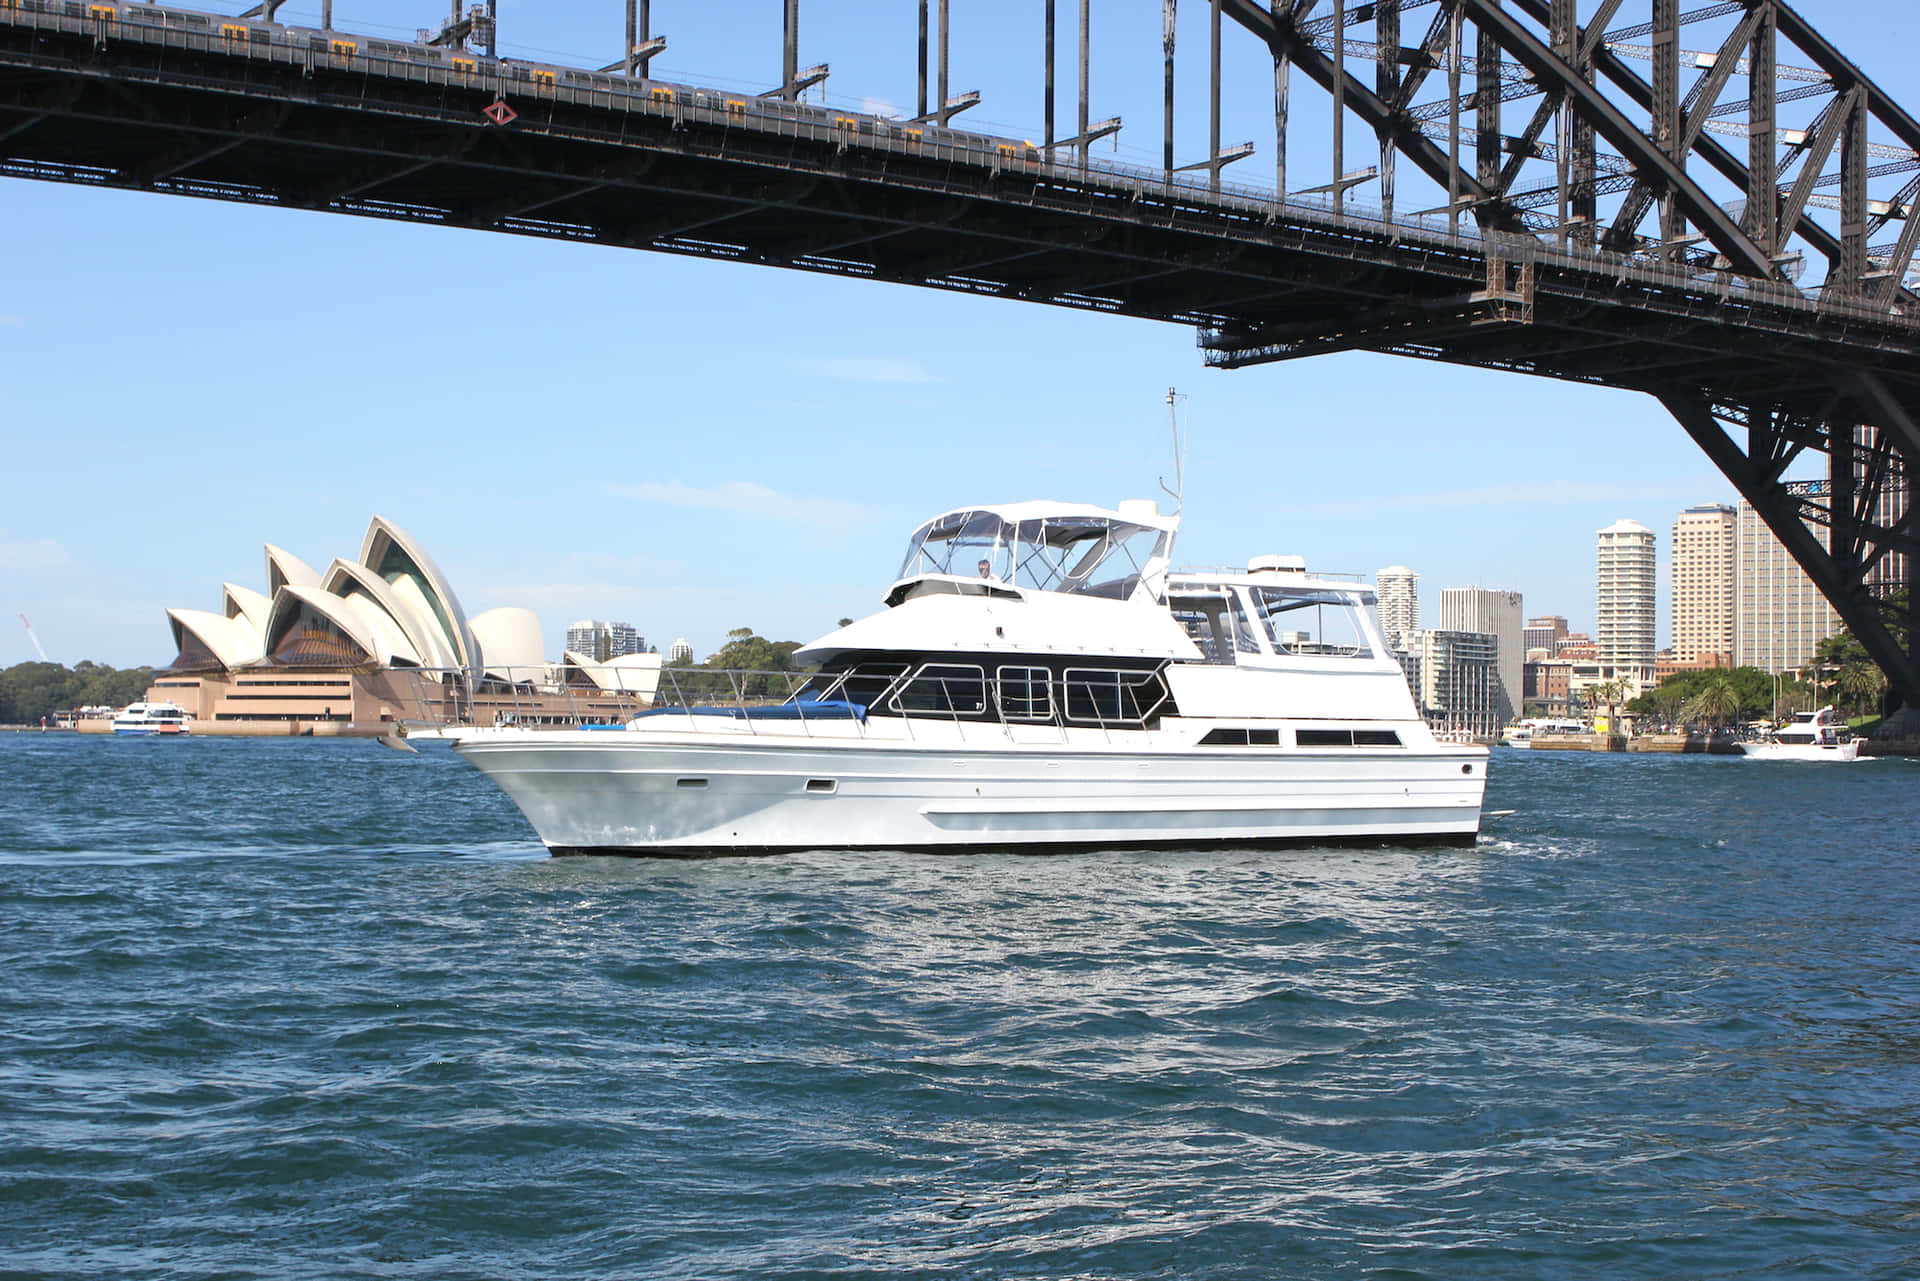 Sydney Harbour Cruise Luxury Yacht Opera House View Wallpaper